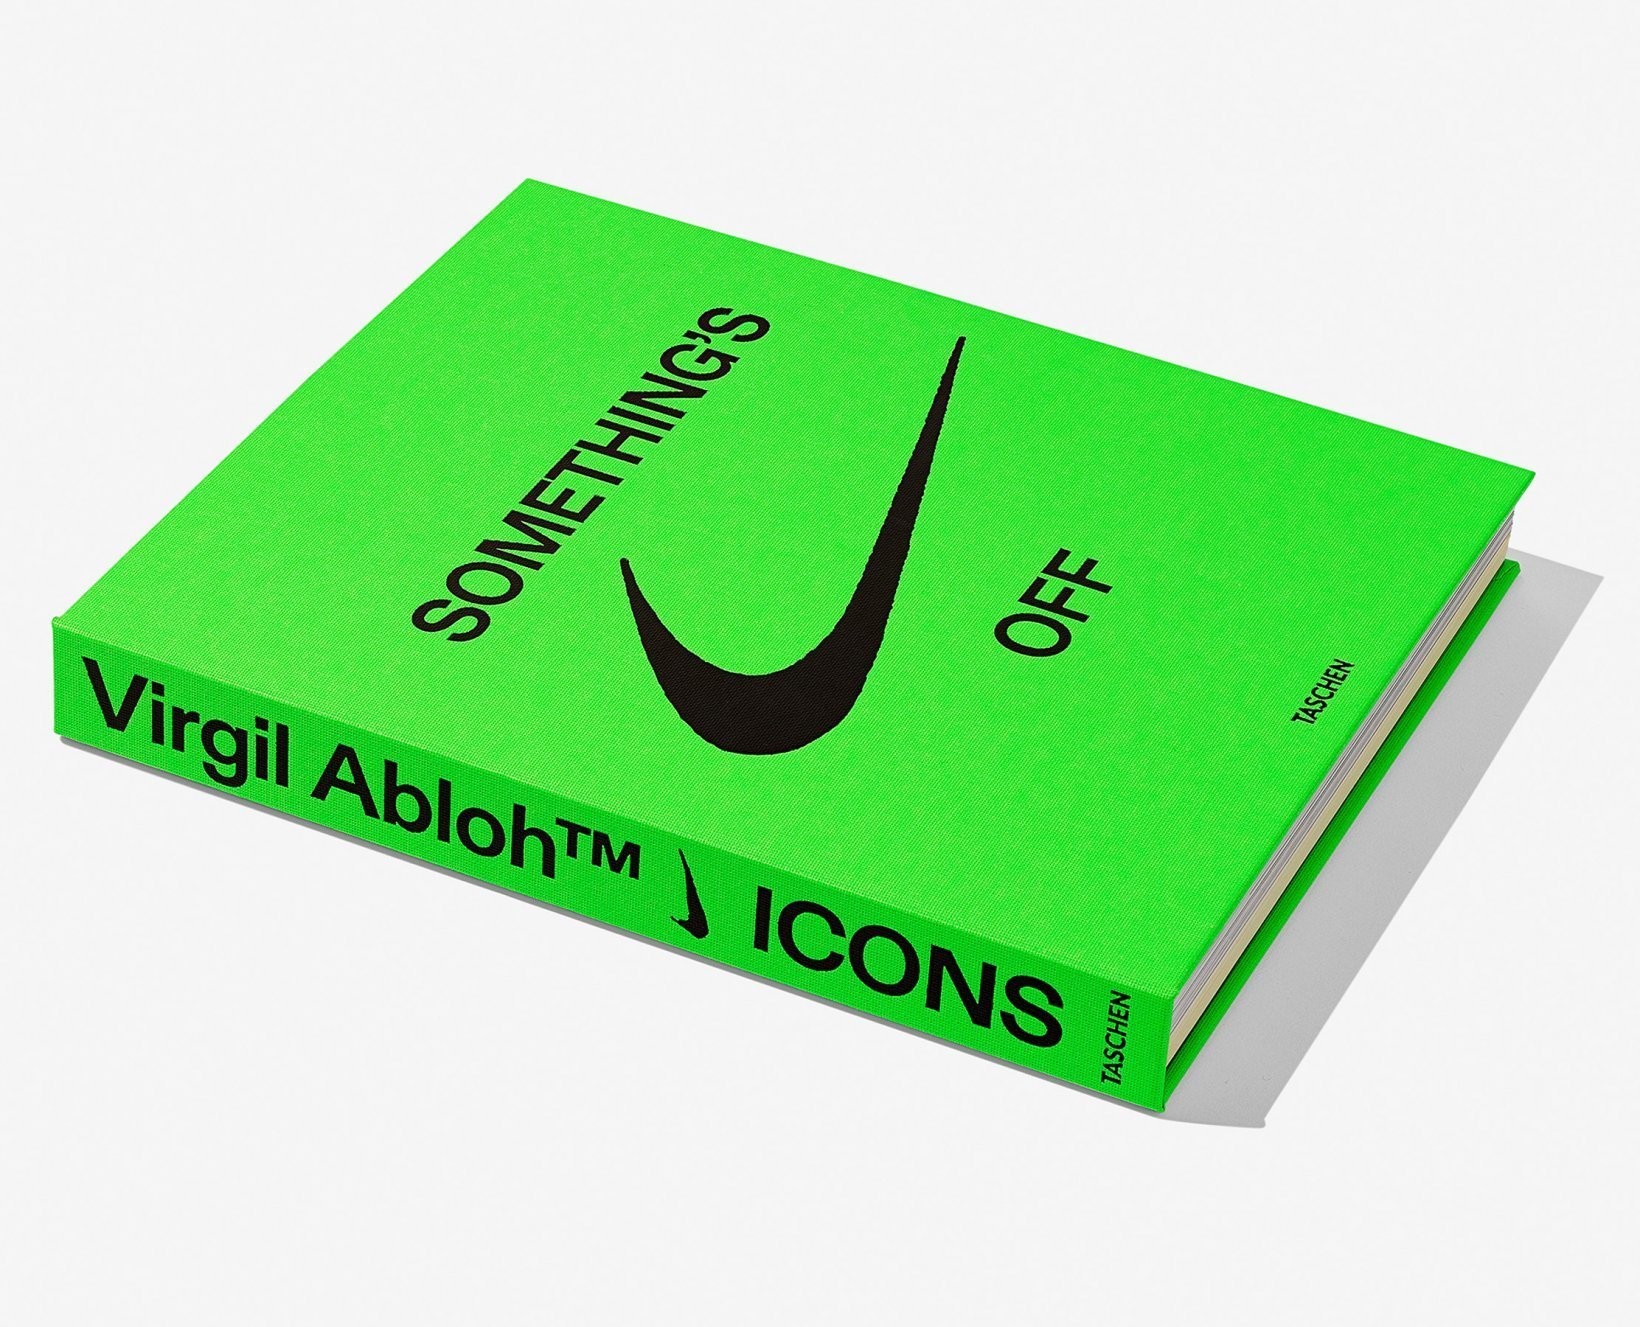 Virgil Abloh x Nike Icons Book (green / hardcover)